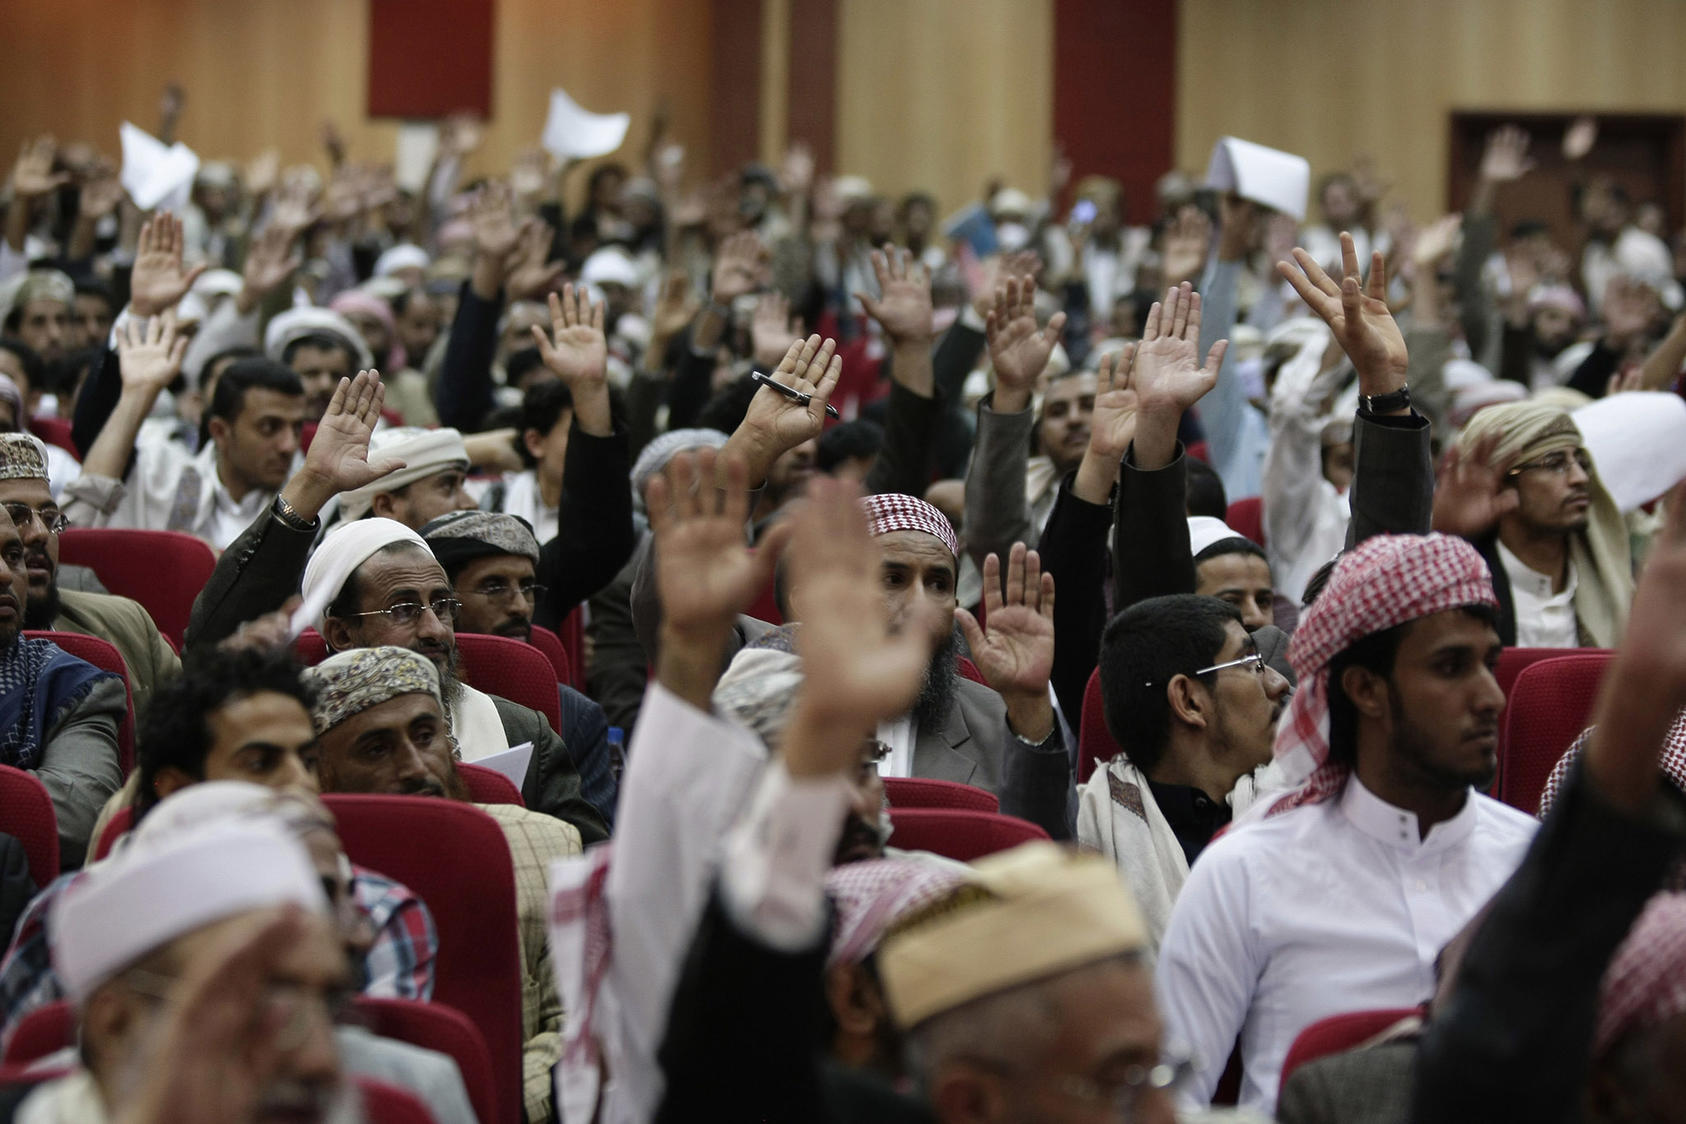 Clerics vote during a press conference held in Sana’a, Yemen, on September 26, 2013, in response to issues raised in Yemen’s national dialogue. (Hani Mohammed/AP)